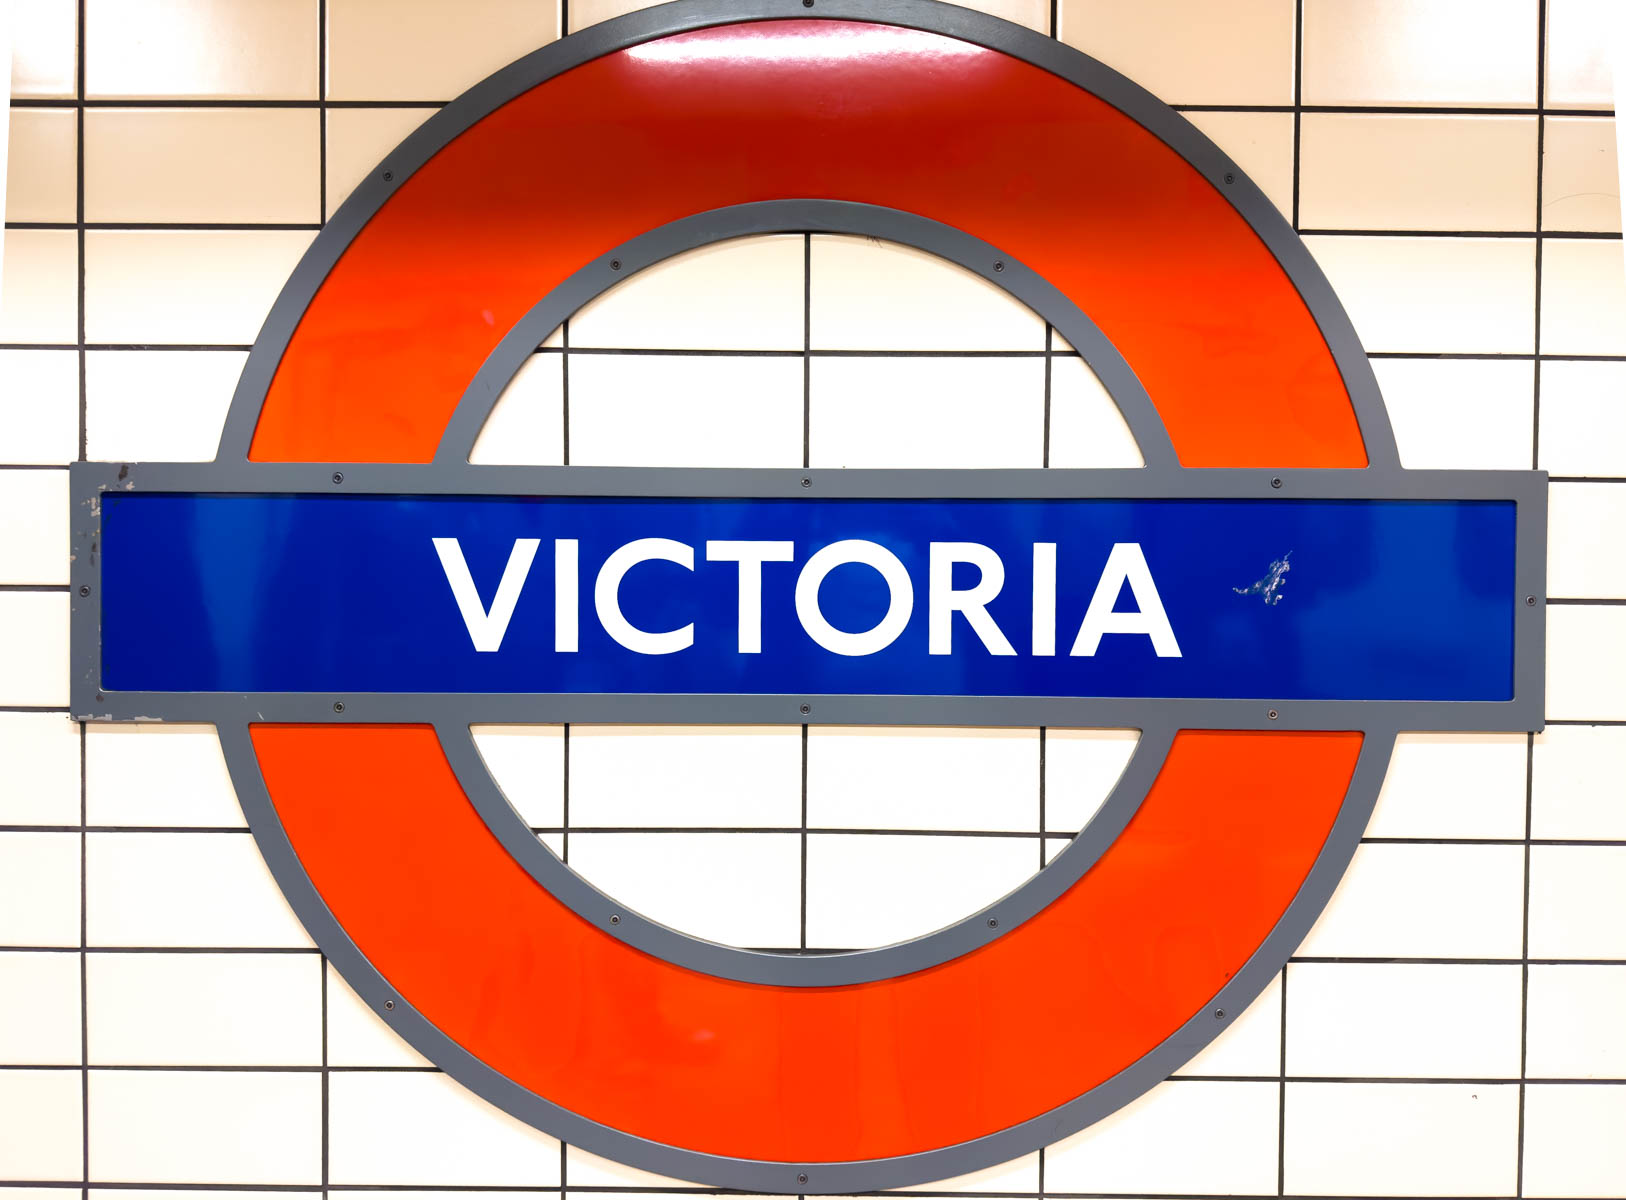 The red and blue circle of the Victoria Station sign in the London Underground.